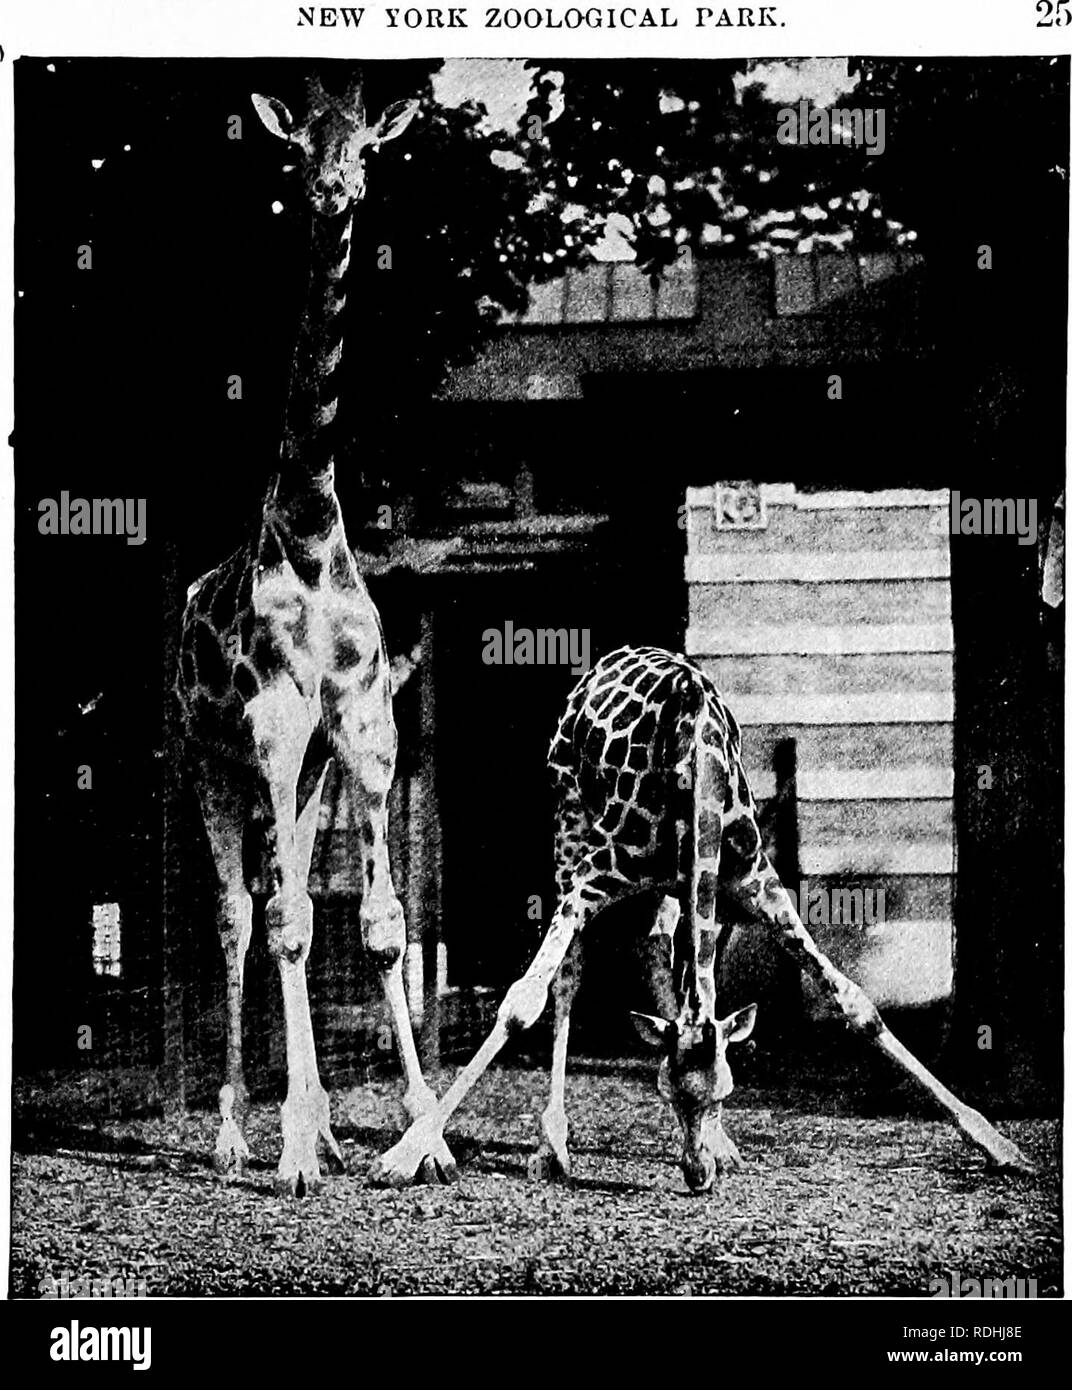 . Popular official guide to the New York Zoological Park . Zoos; Zoo animals. NEW i'ORK ZOOLOGICAL PARK.. N0BIAN GIRAFFES. ing to it rank as a separate species, because of its inter- gradation with the Nubian form, {camelopardalis). Judging from all evidence now available, it seems that the Giraffes of to-day represent the midway stage of an effort to develop several species from the parent stock, the Three-Horned Giraffe, which is the species here rep- resented. The existing forms, including all species and sub- species, intergrade and run together in a manner that is fairly bewildering; but  Stock Photo